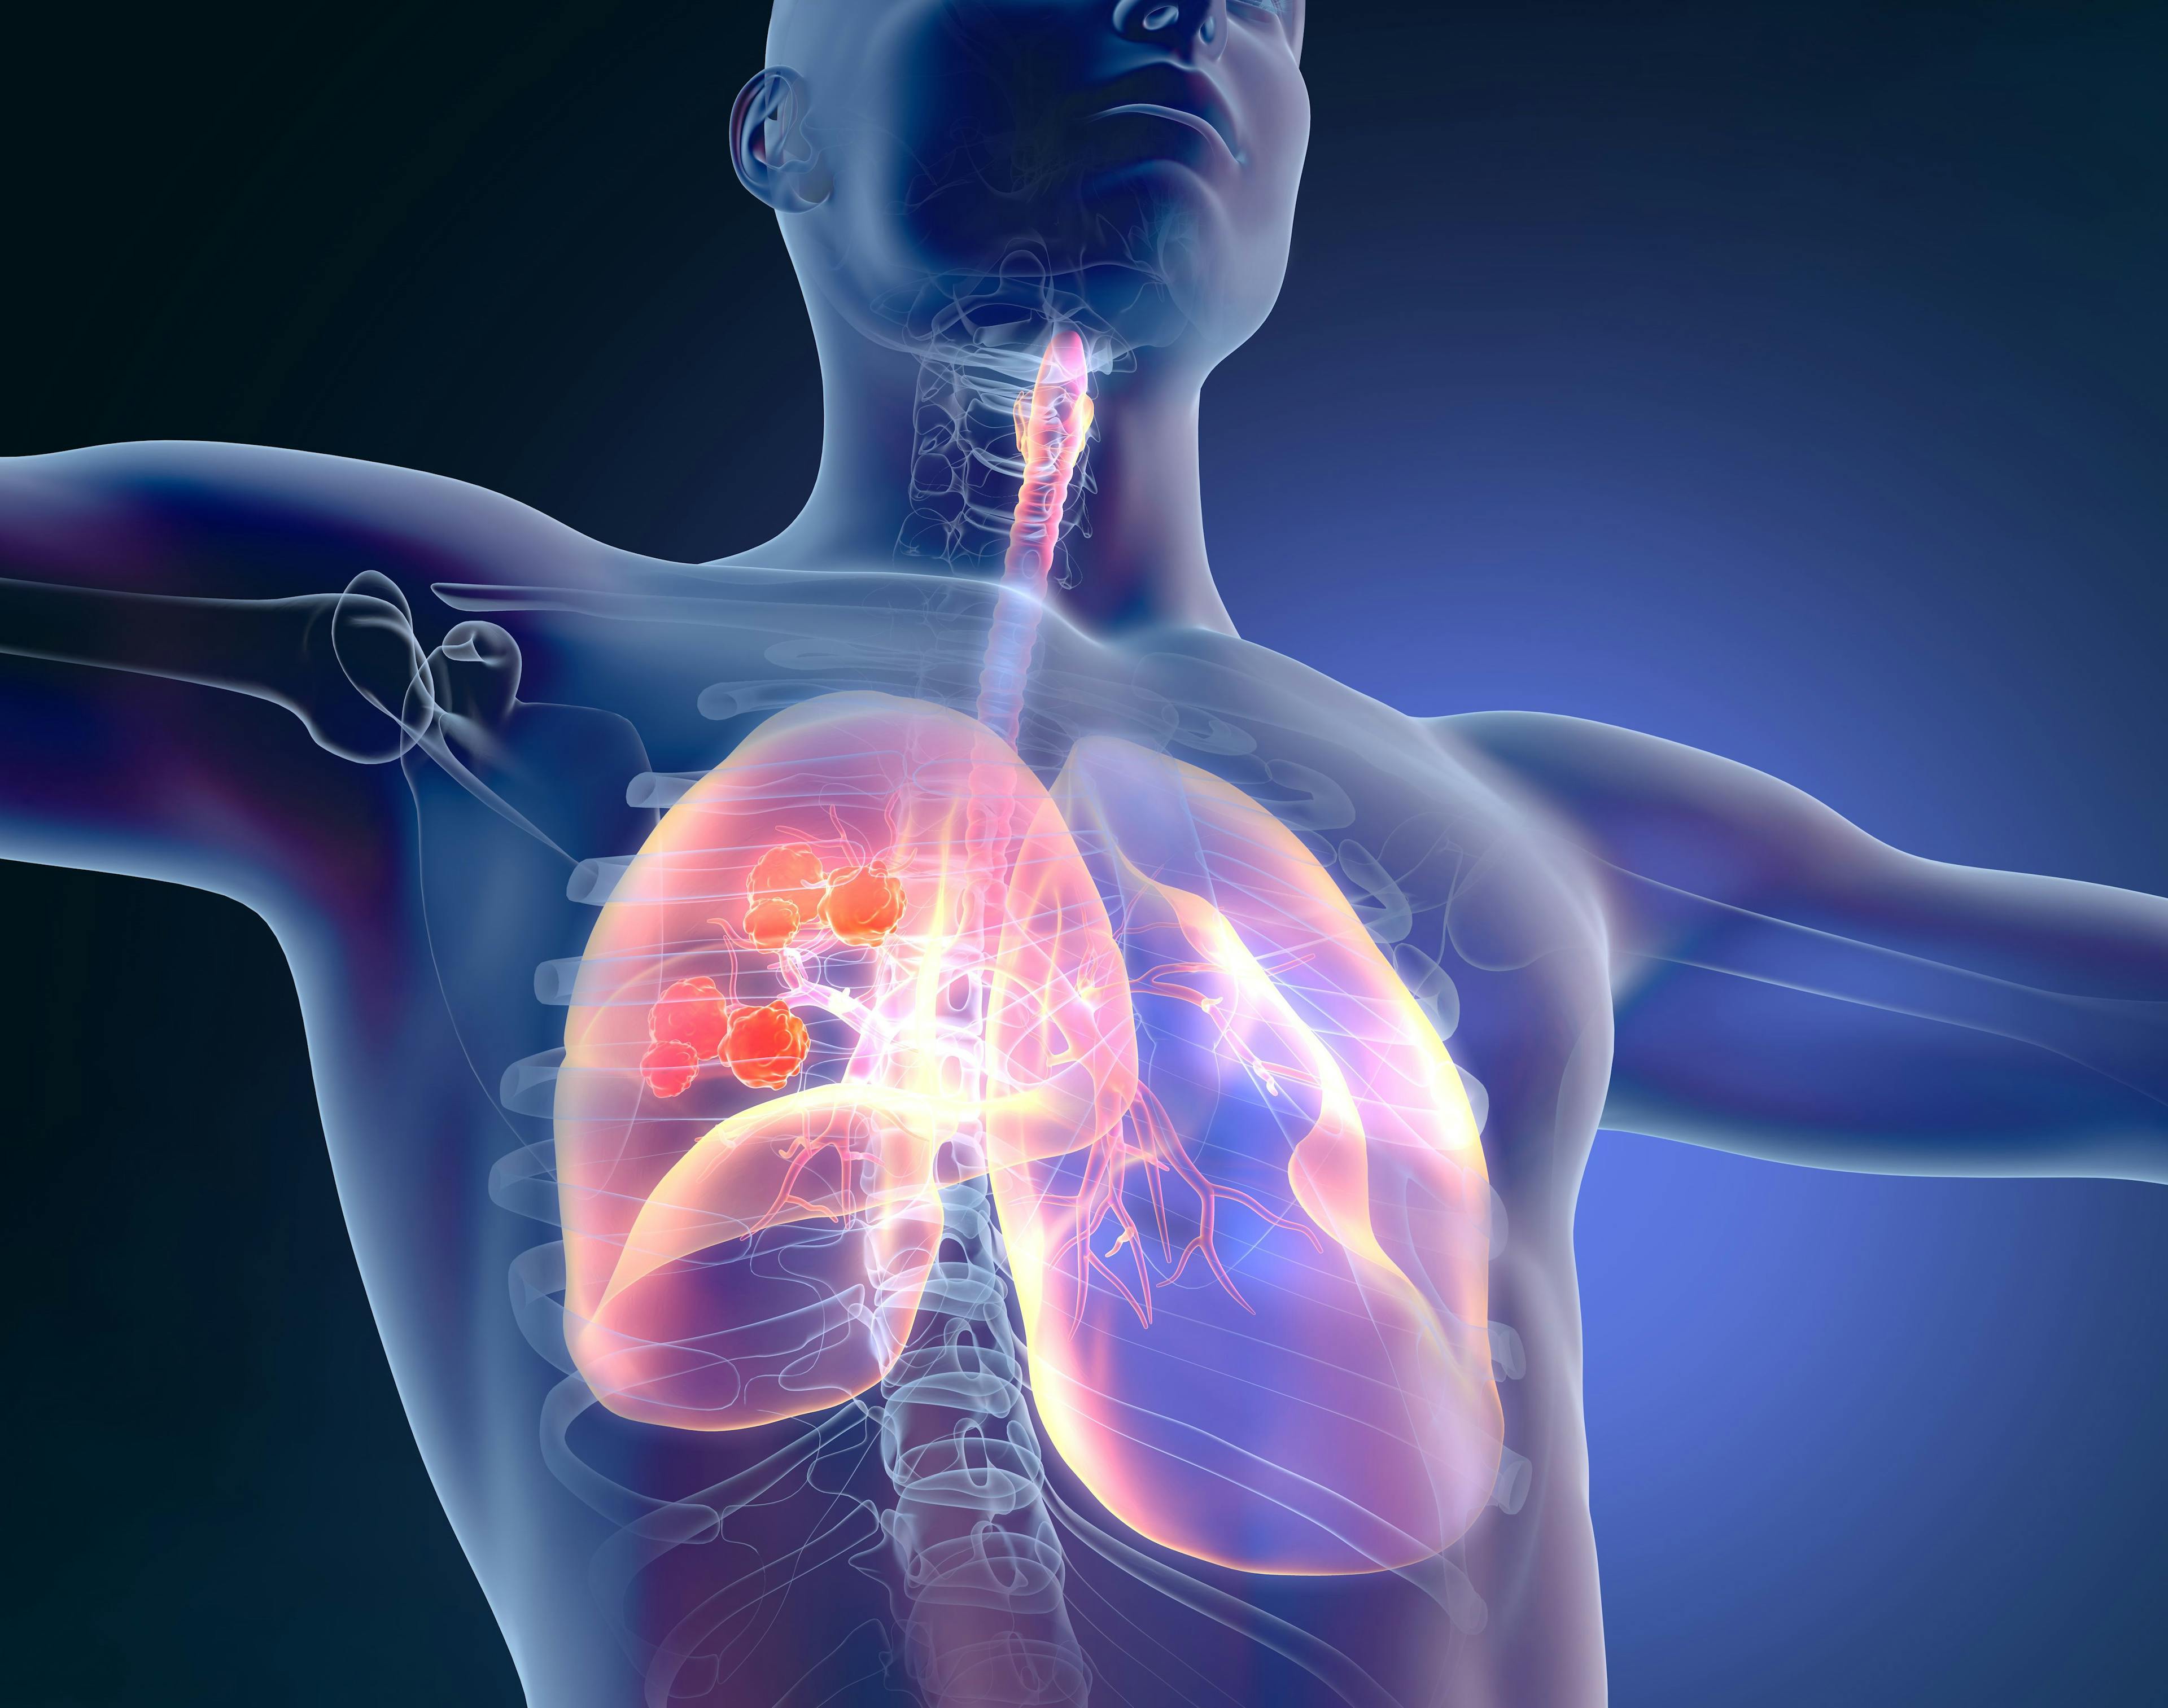 FDA Accepts New Drug Application for Poziotinib in HER2 Exon 20+ NSCLC